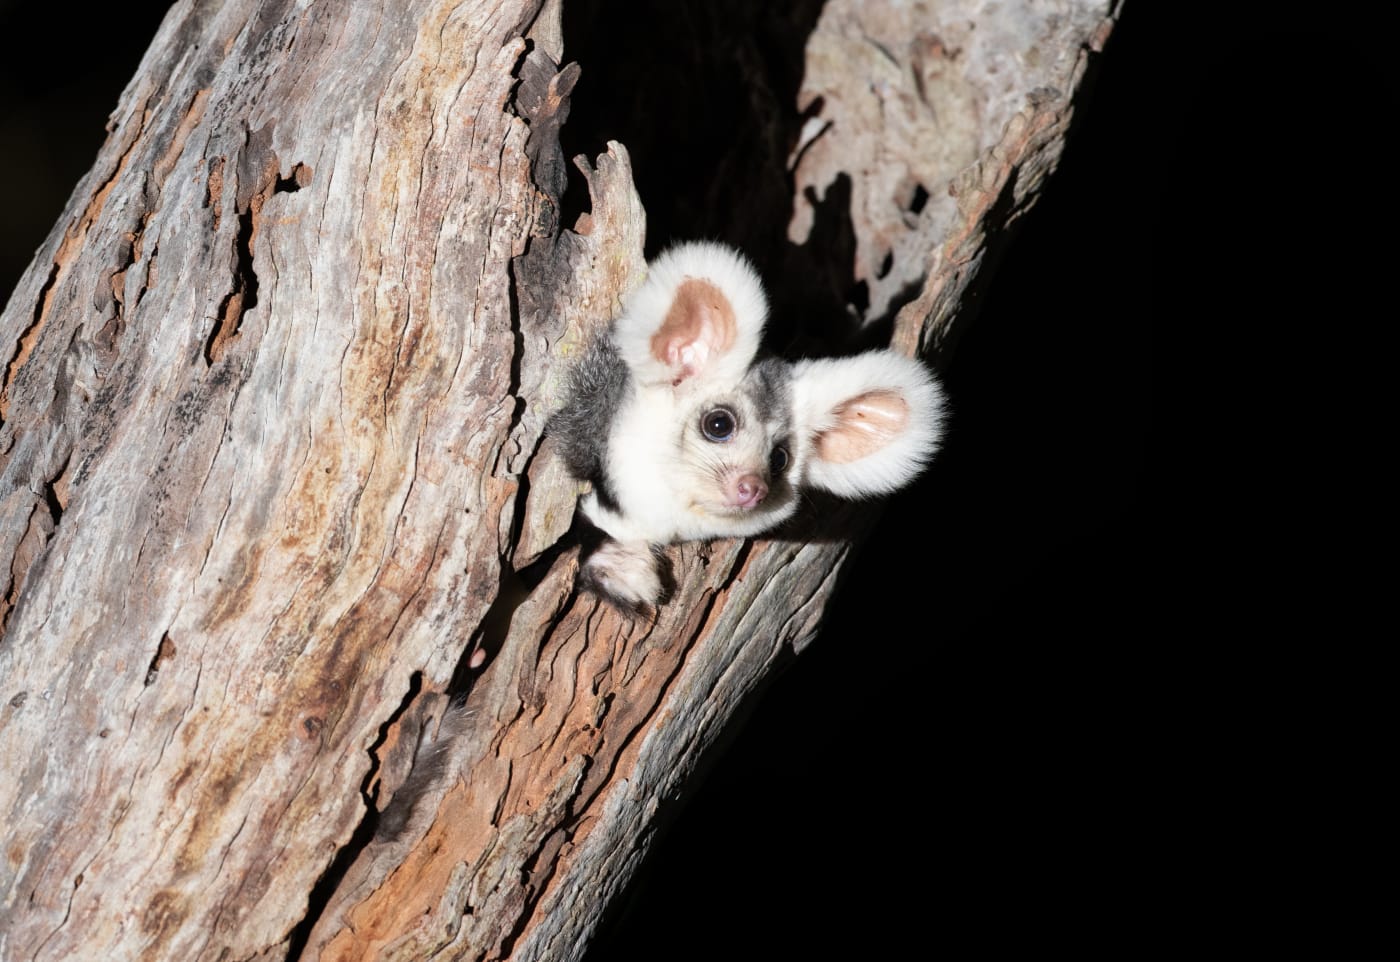 A greater glider peaks his head out from a hollow in an old growth forest.